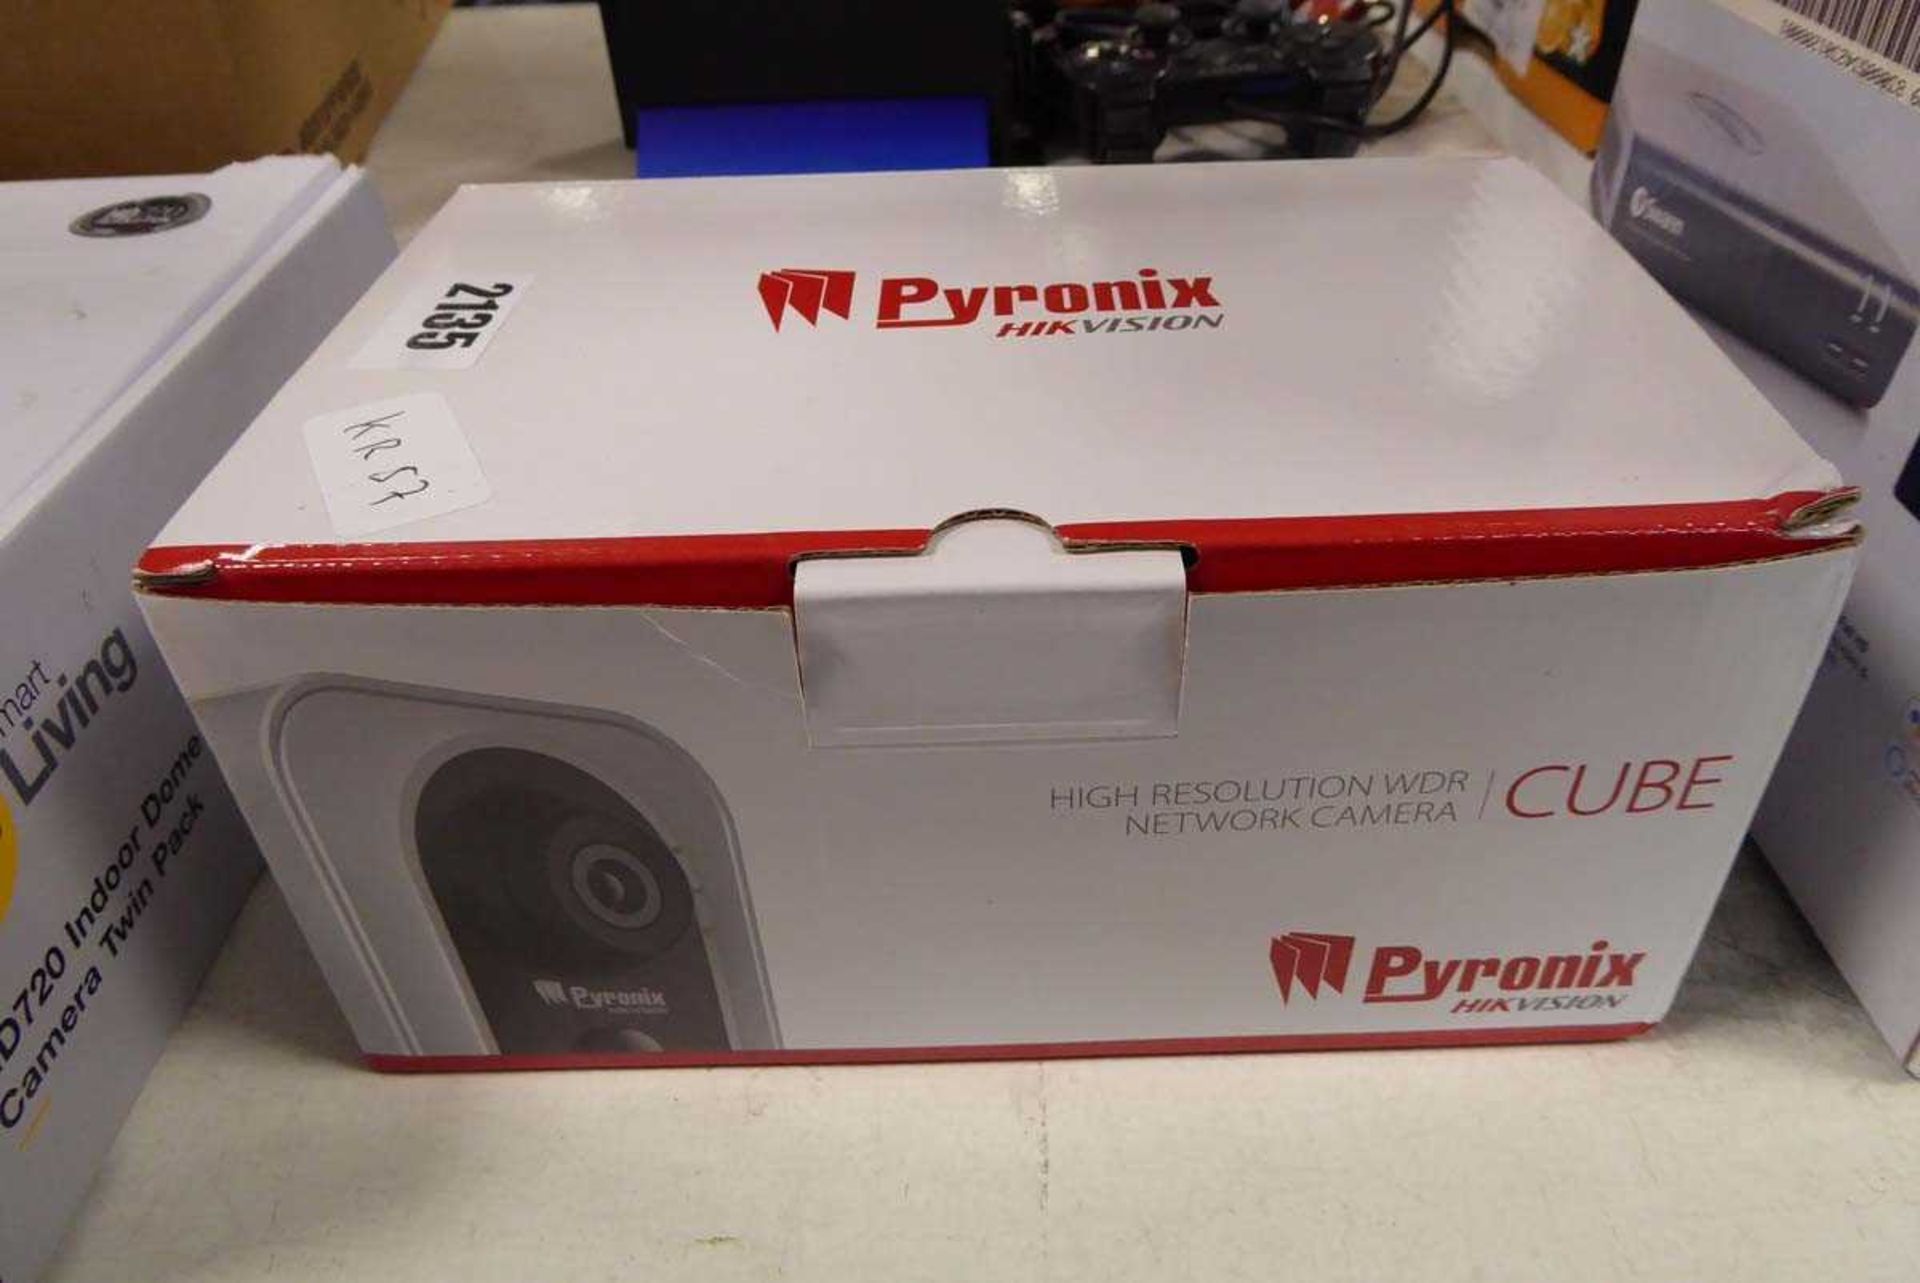 HikVision network camera cube in box